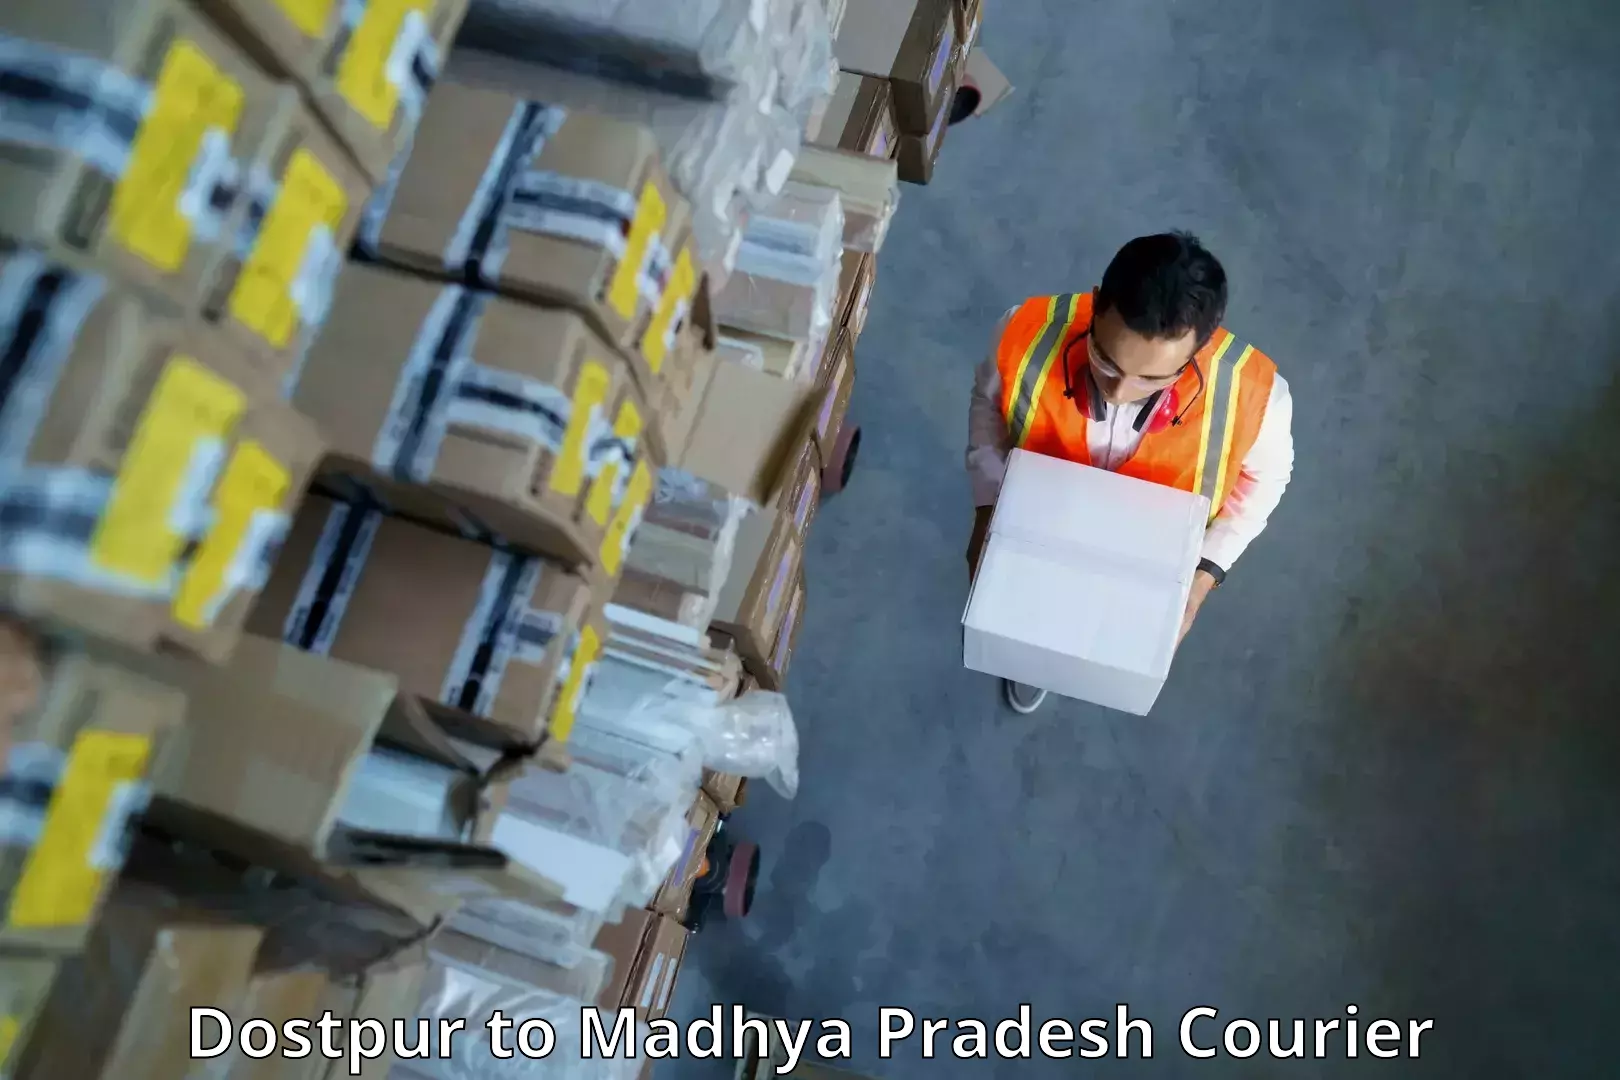 24/7 shipping services in Dostpur to Jabalpur